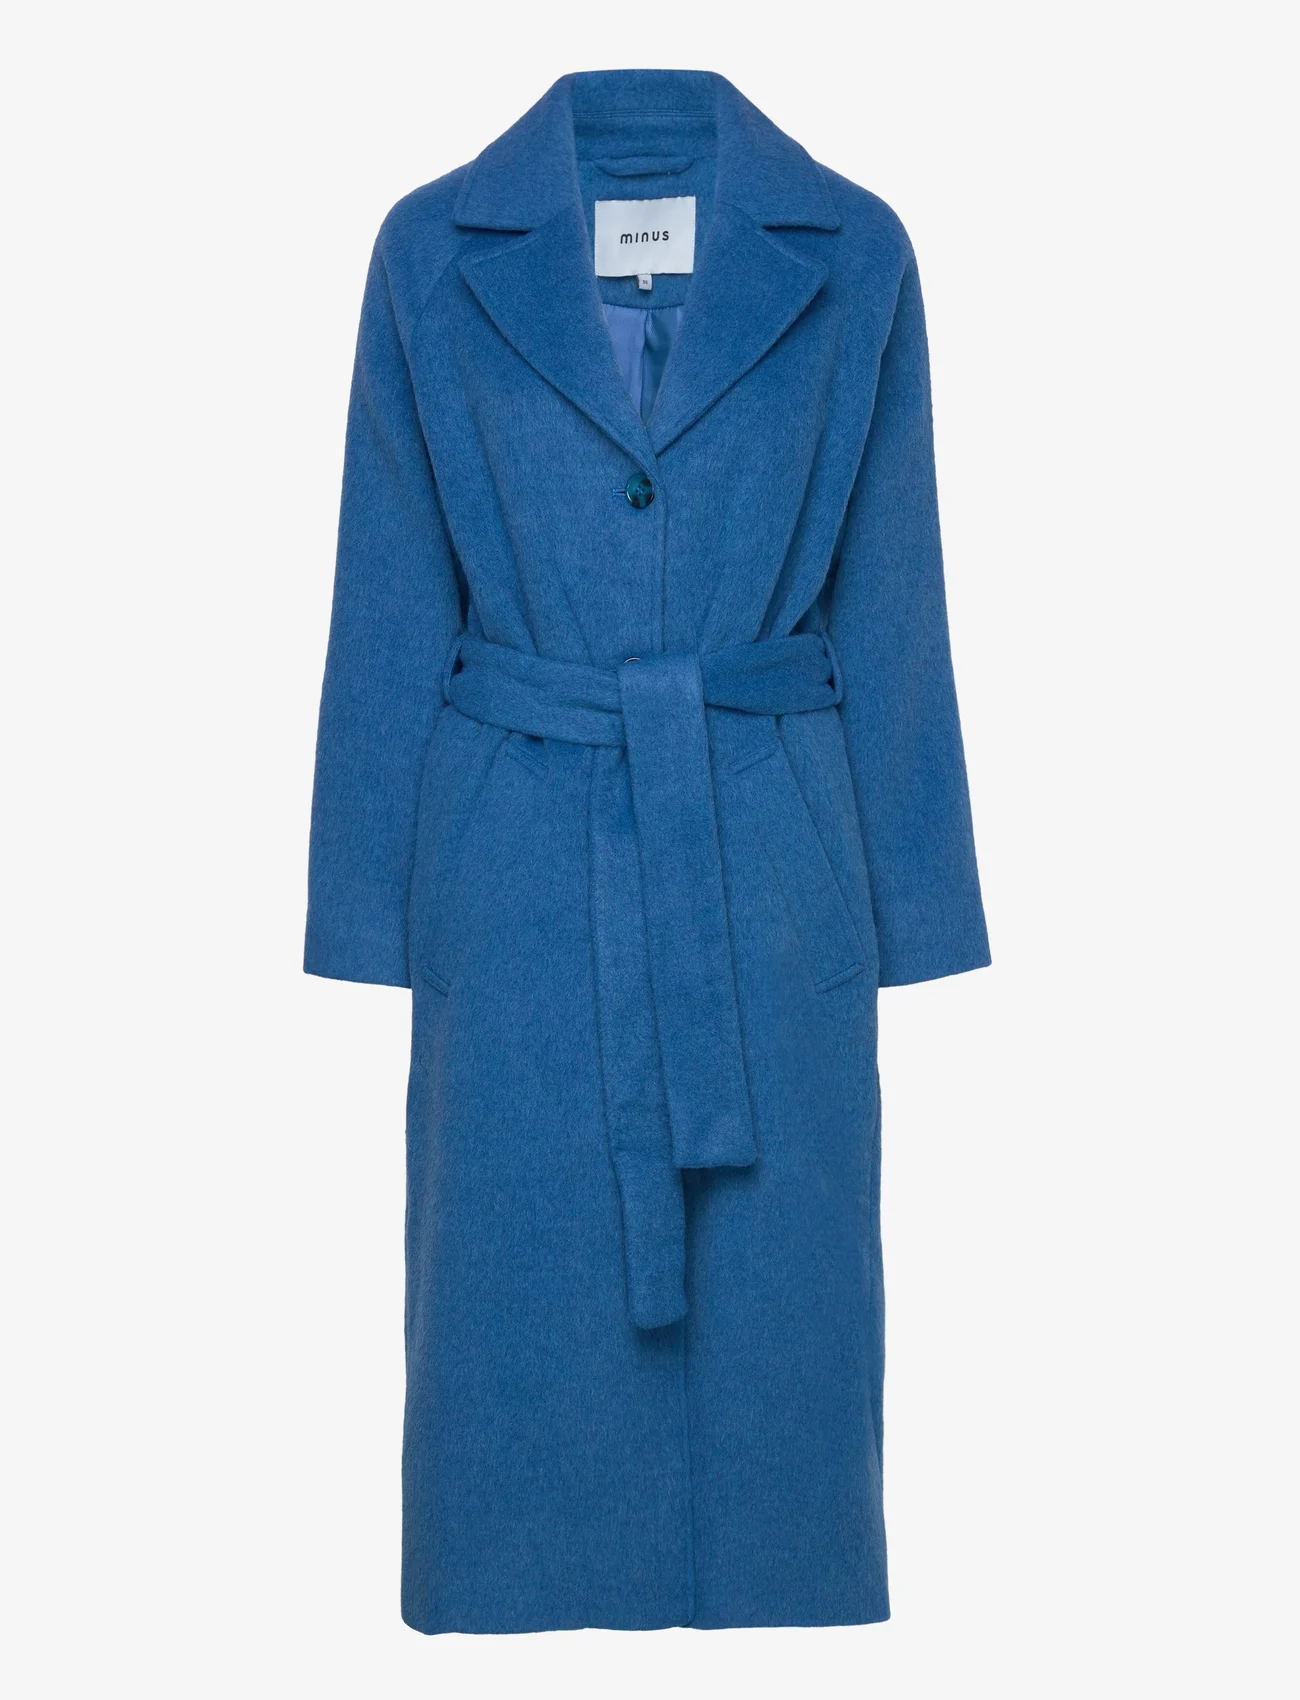 Minus - MSGloria Wool Belted Coat - winter coats - imperial blue - 0